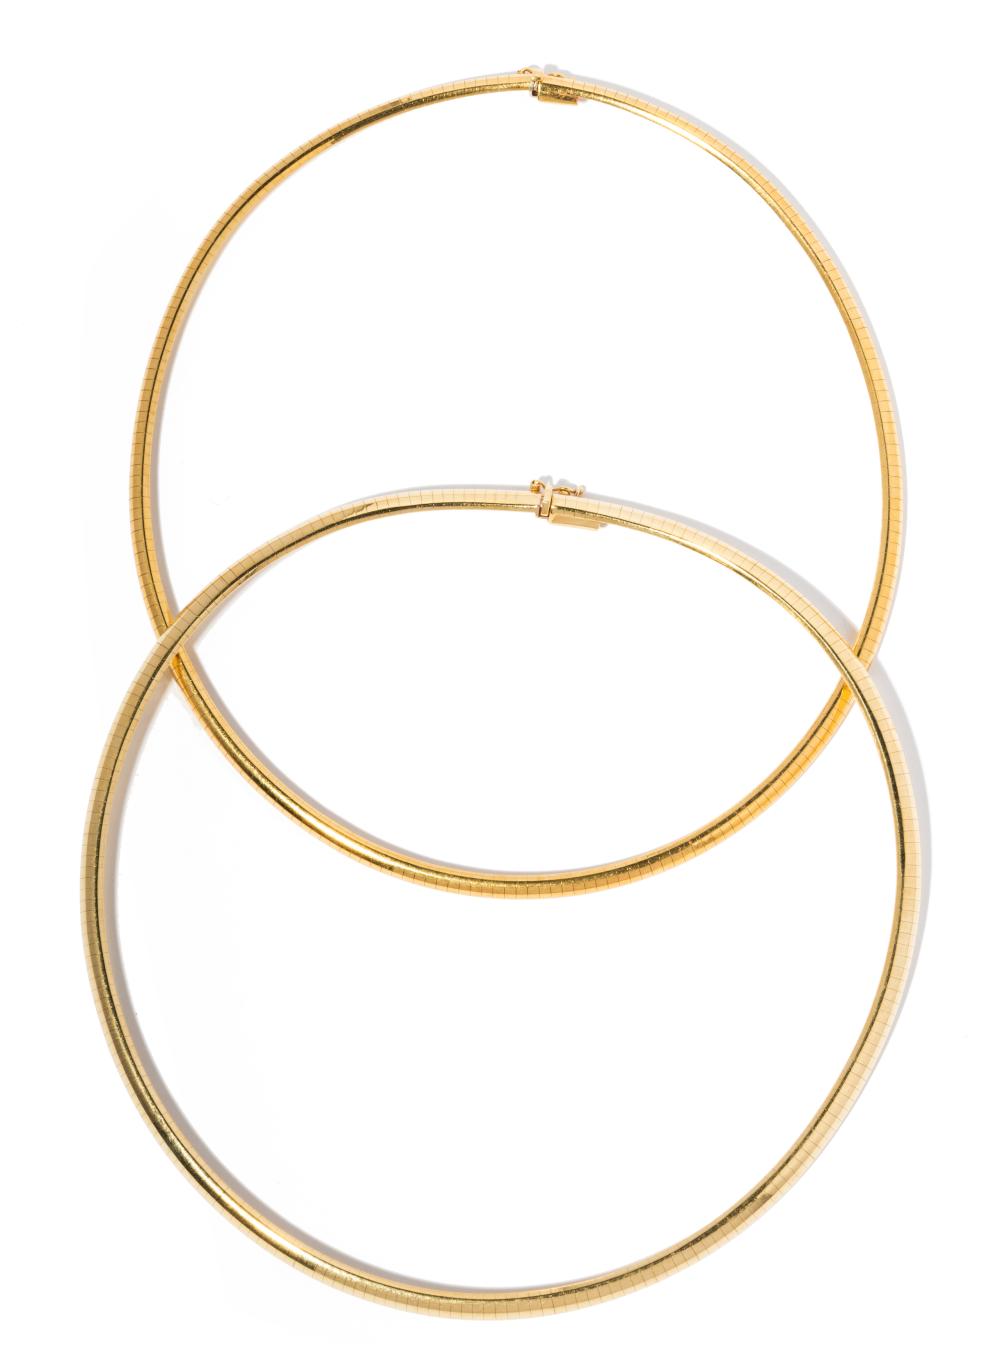 TWO YELLOW GOLD OMEGA LINK NECKLACESTwo 3c82b6